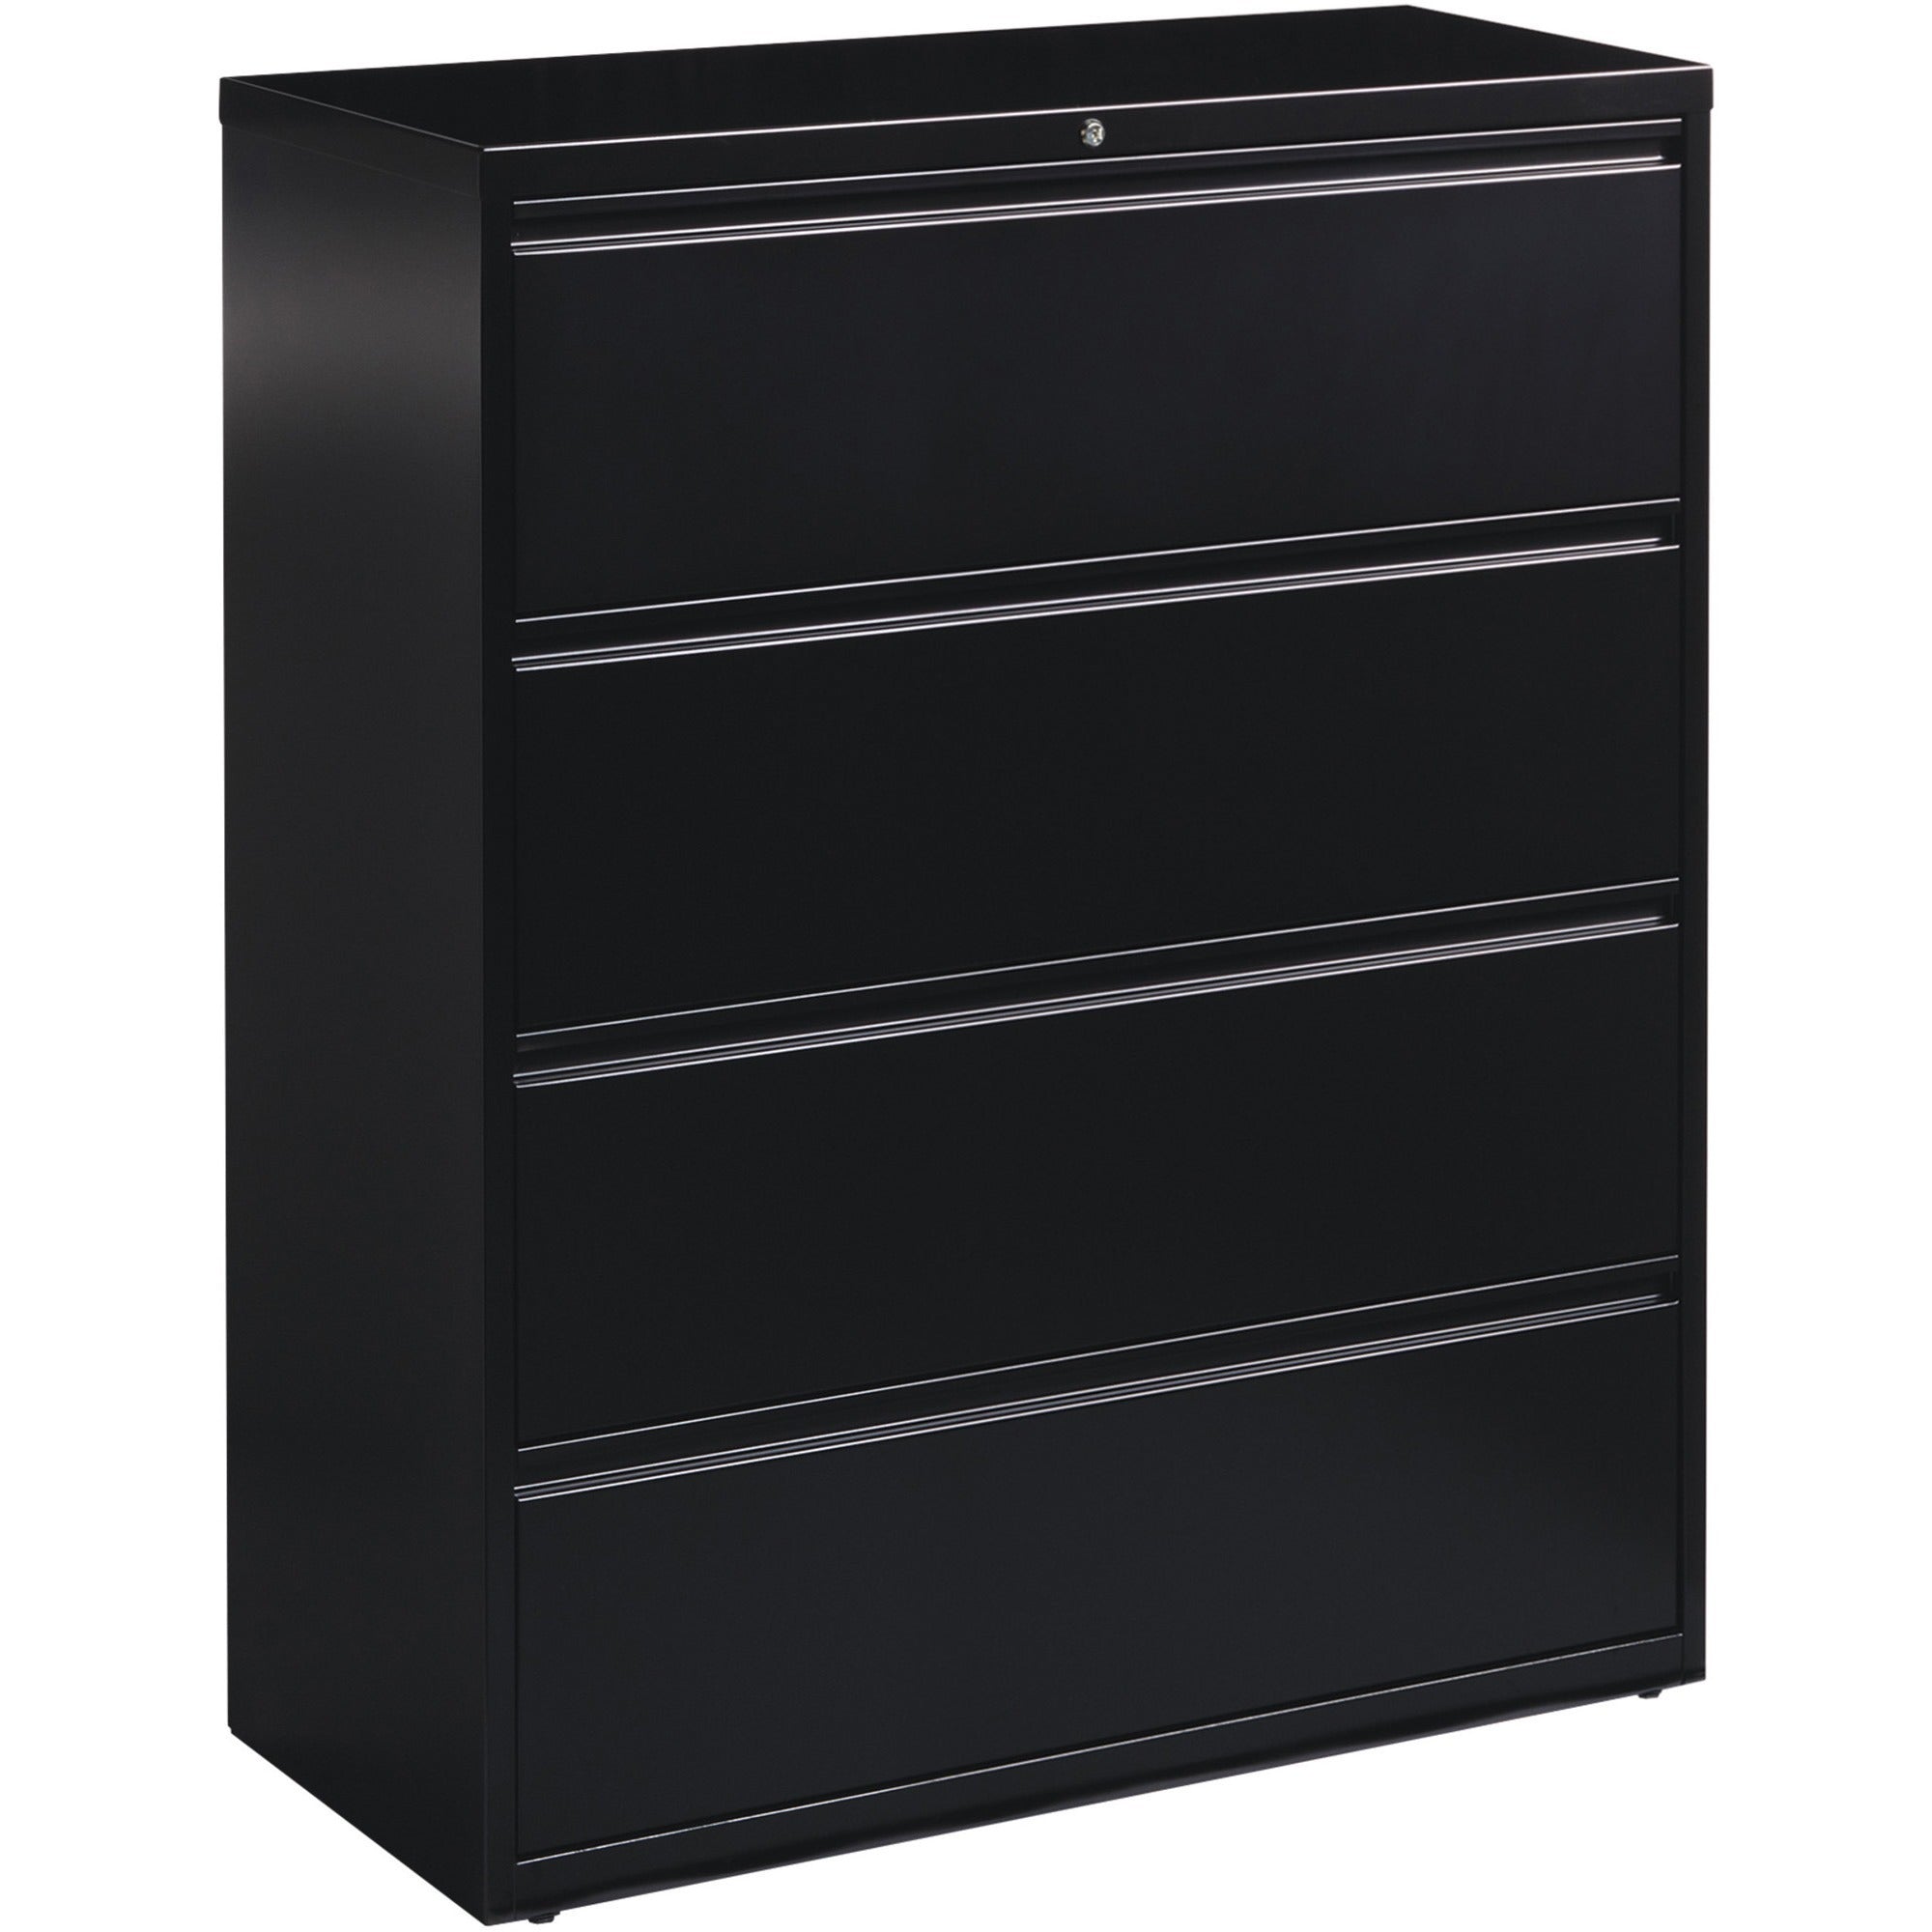 Lorell Fortress Series Lateral File - 42" x 18.6" x 52.5" - 4 x Drawer(s) for File - Letter, Legal, A4 - Lateral - Interlocking, Leveling Glide, Label Holder, Ball-bearing Suspension - Black - Recycled - 